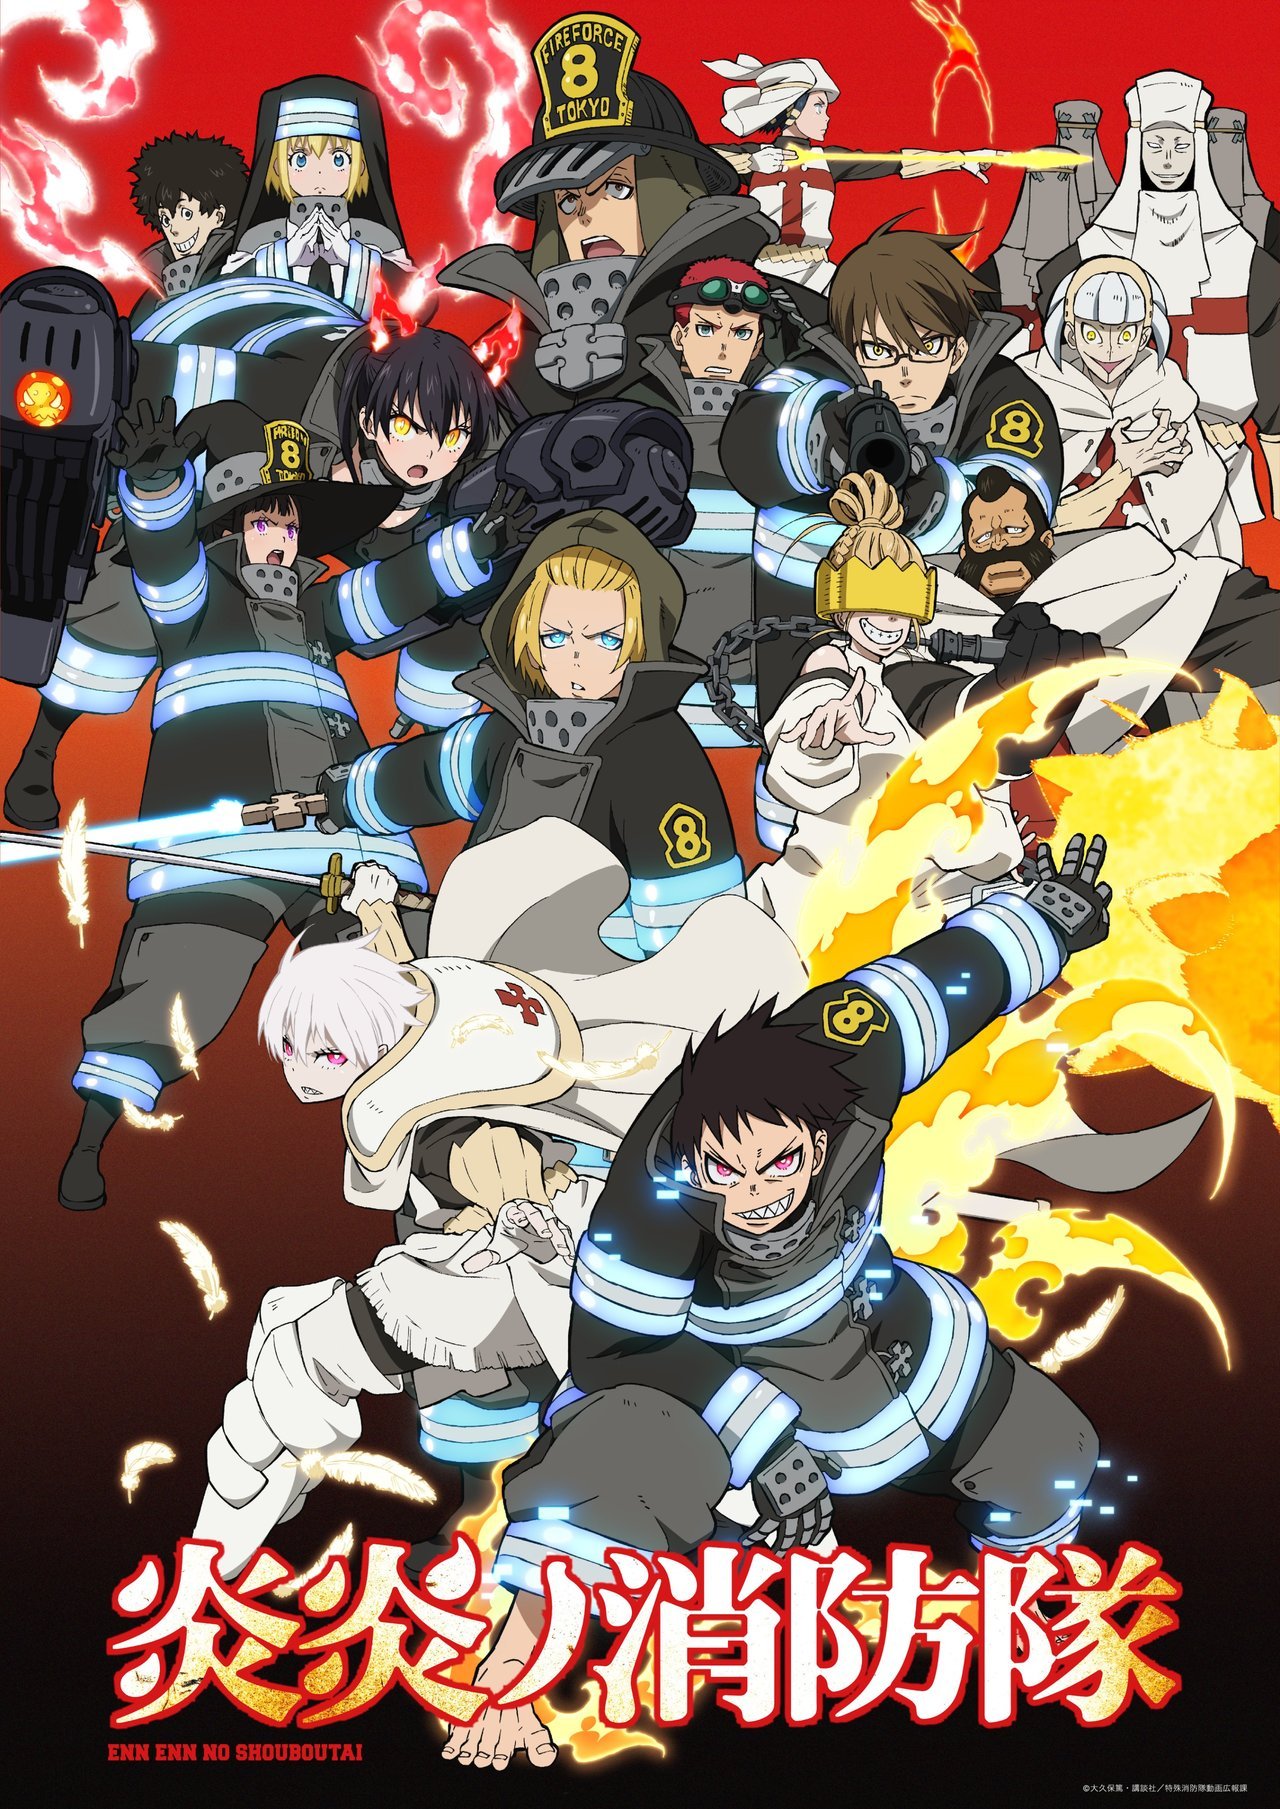 The official site for the TV anime of Atsushi Ohkubo's Fire Force (En no  Shōbōtai) manga streamed another trailer for the Fire …